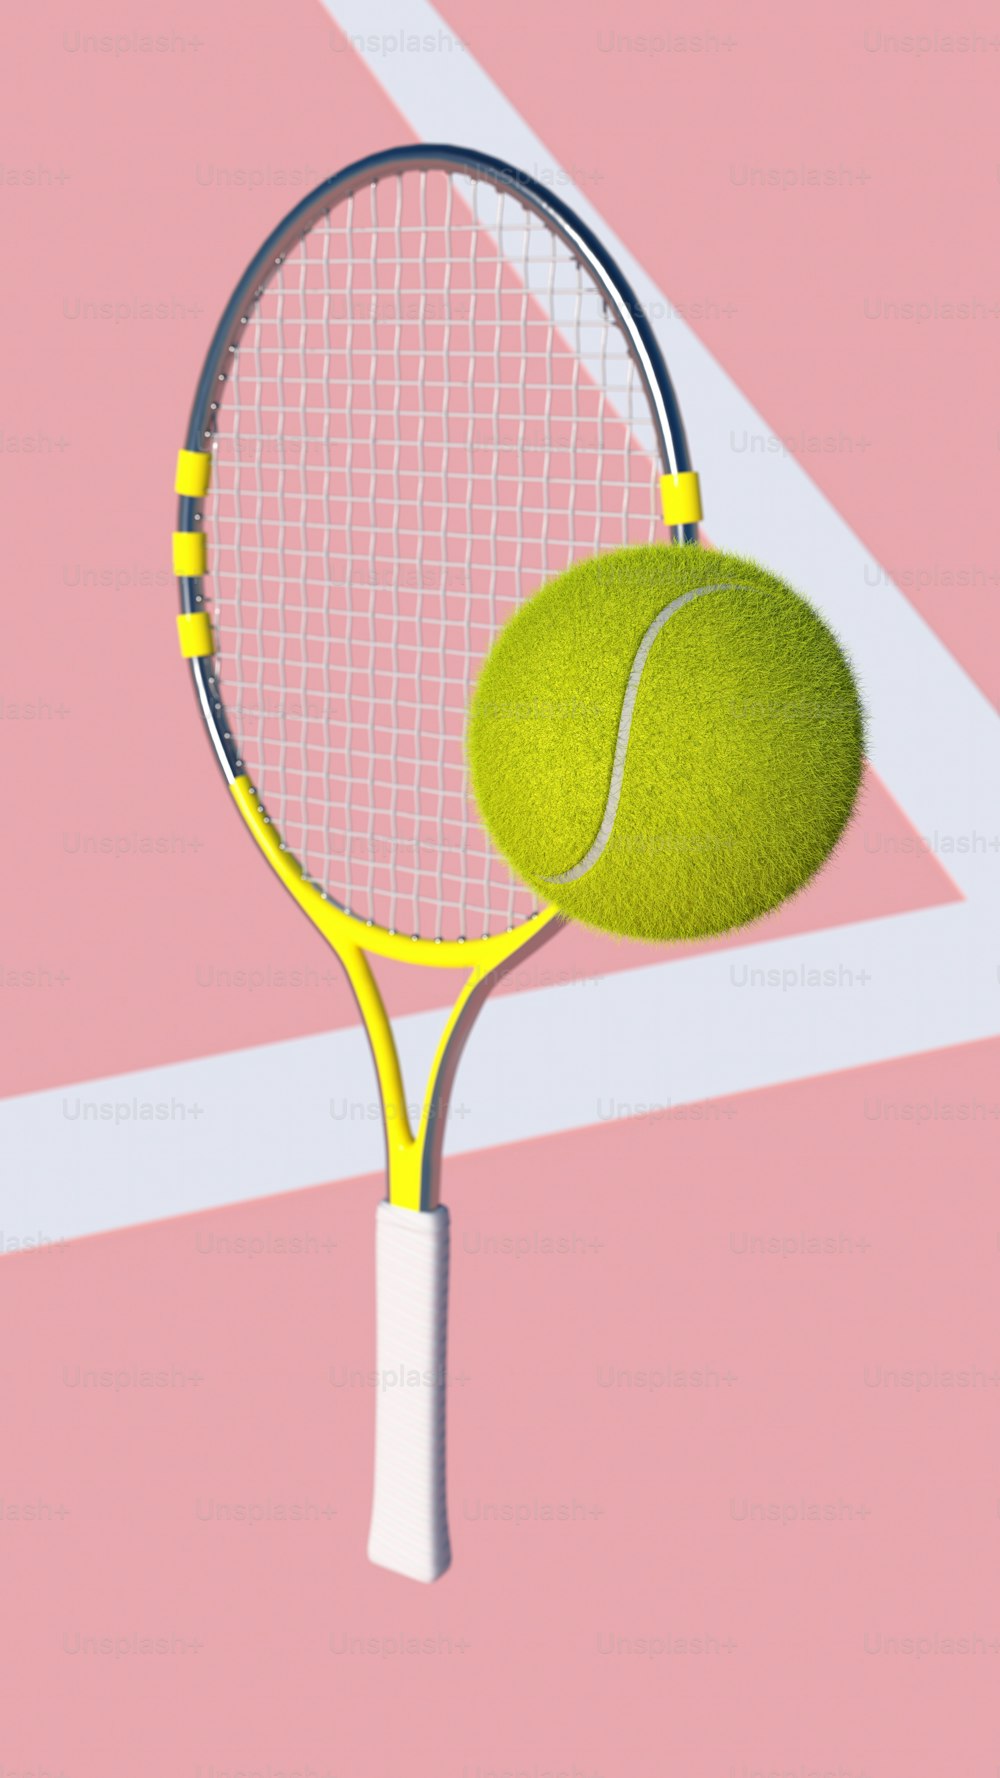 a tennis racket and a tennis ball on a pink background